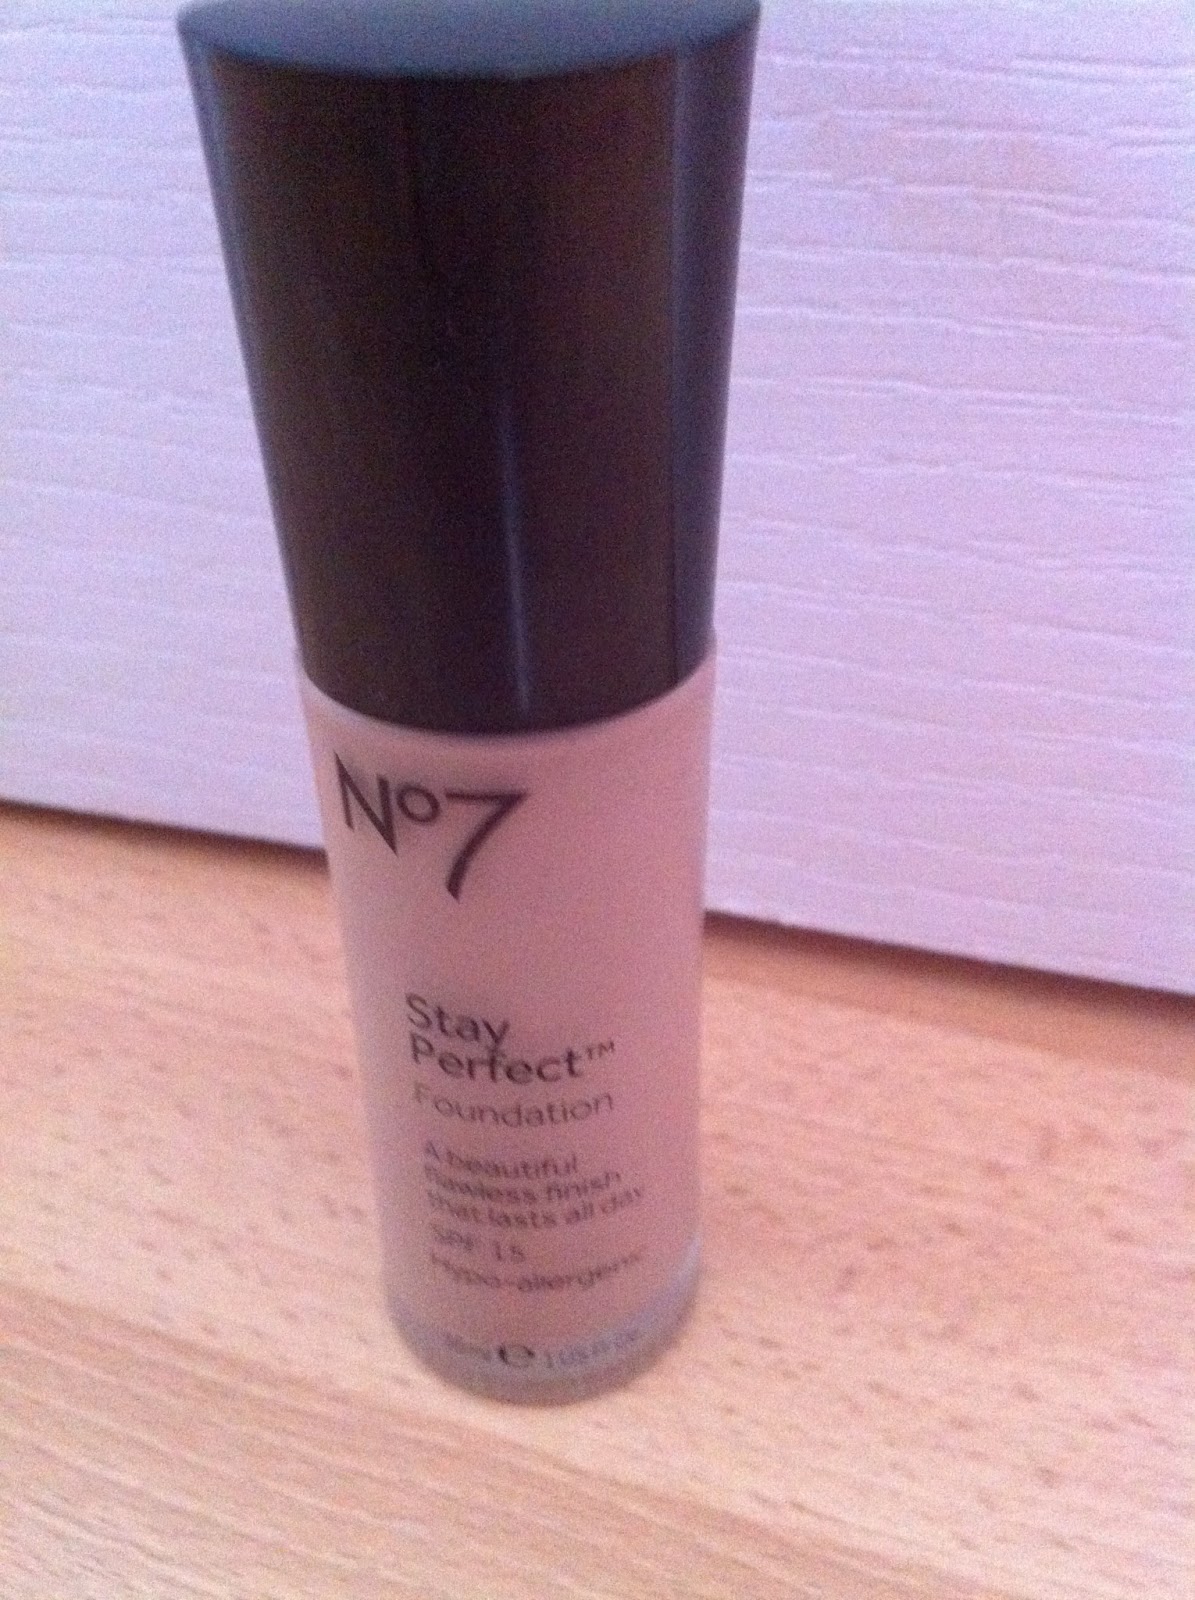 Love -X- Beauty: Review: No 7 Stay Perfect Foundation